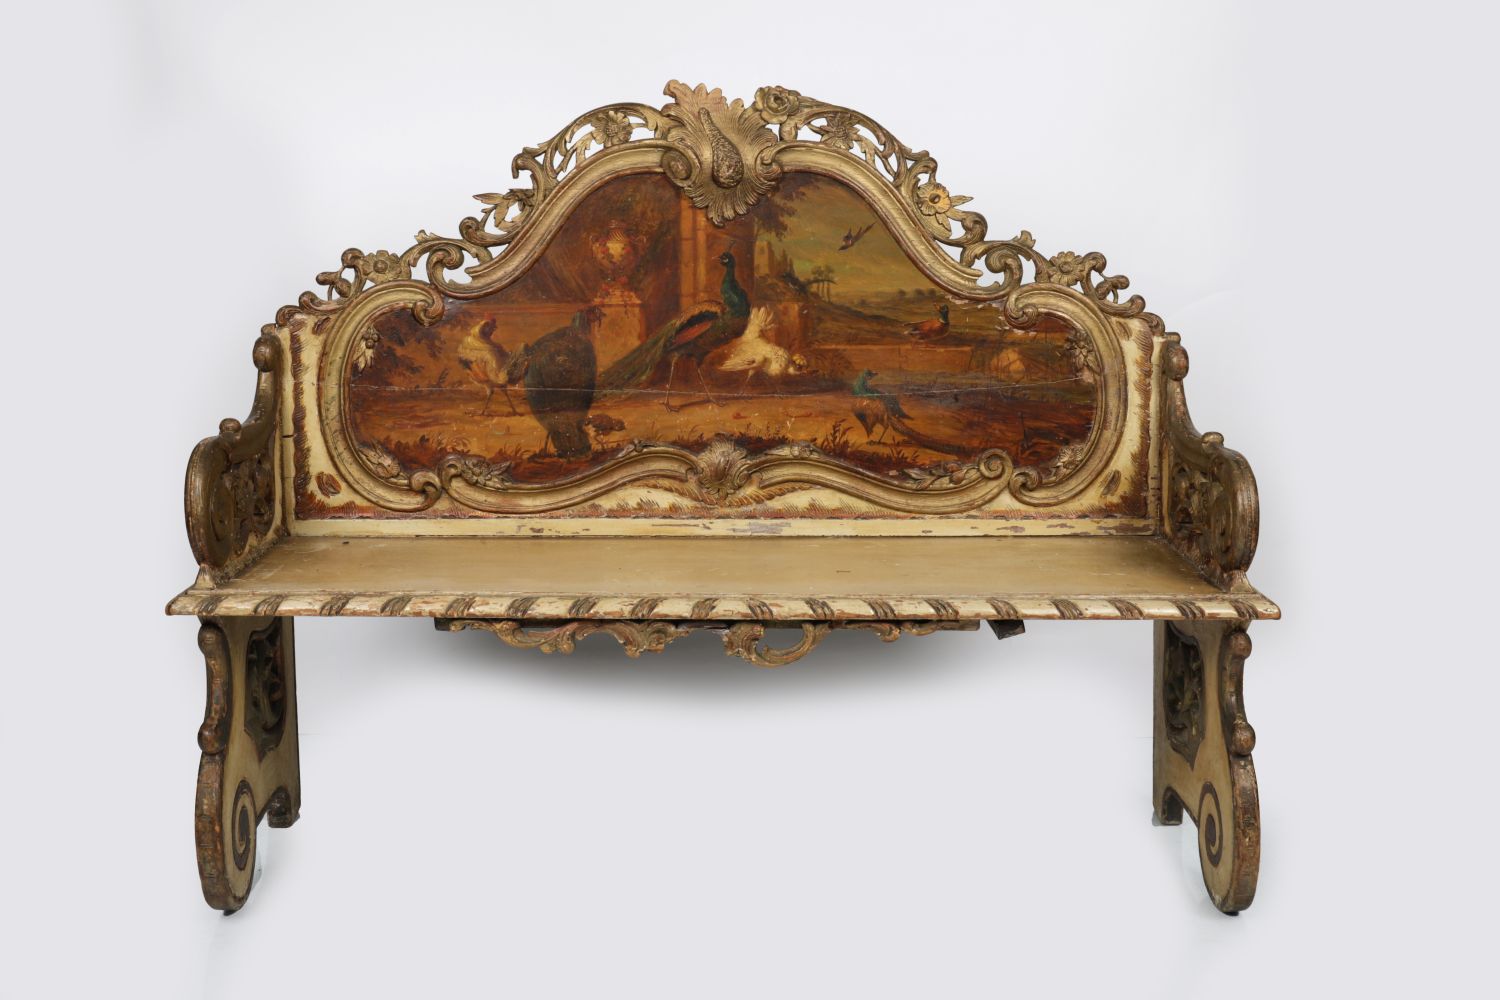 19TH-CENTURY CARVED GILTWOOD BENCH